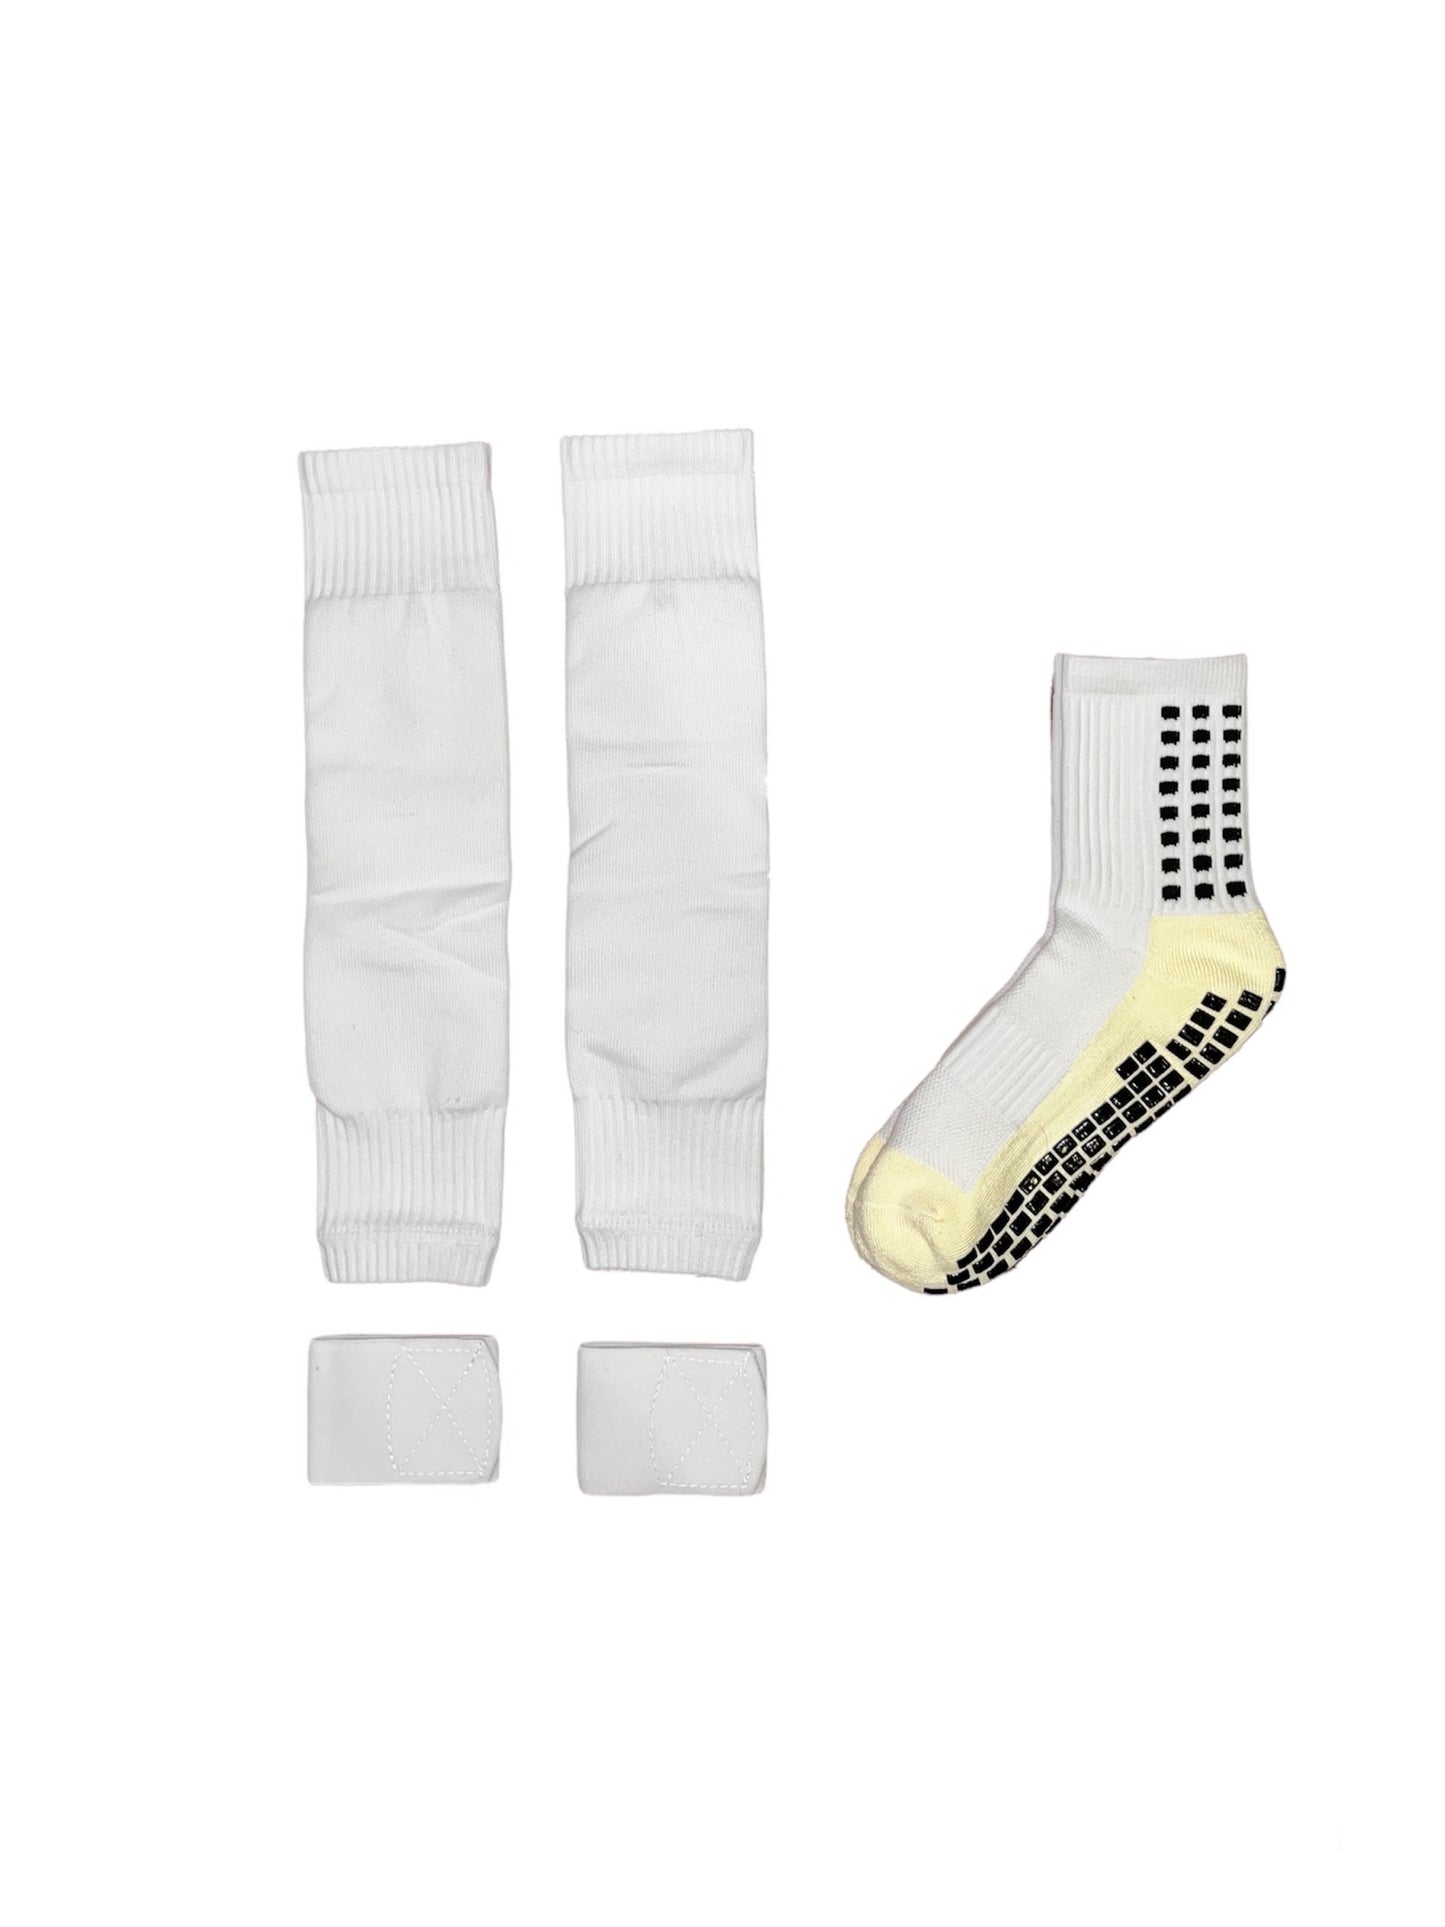 Athletic Grippers Soccer Sport Cushion Socks Anti-Slip Non-Slip Grip 3Pairs, Shop Today. Get it Tomorrow!